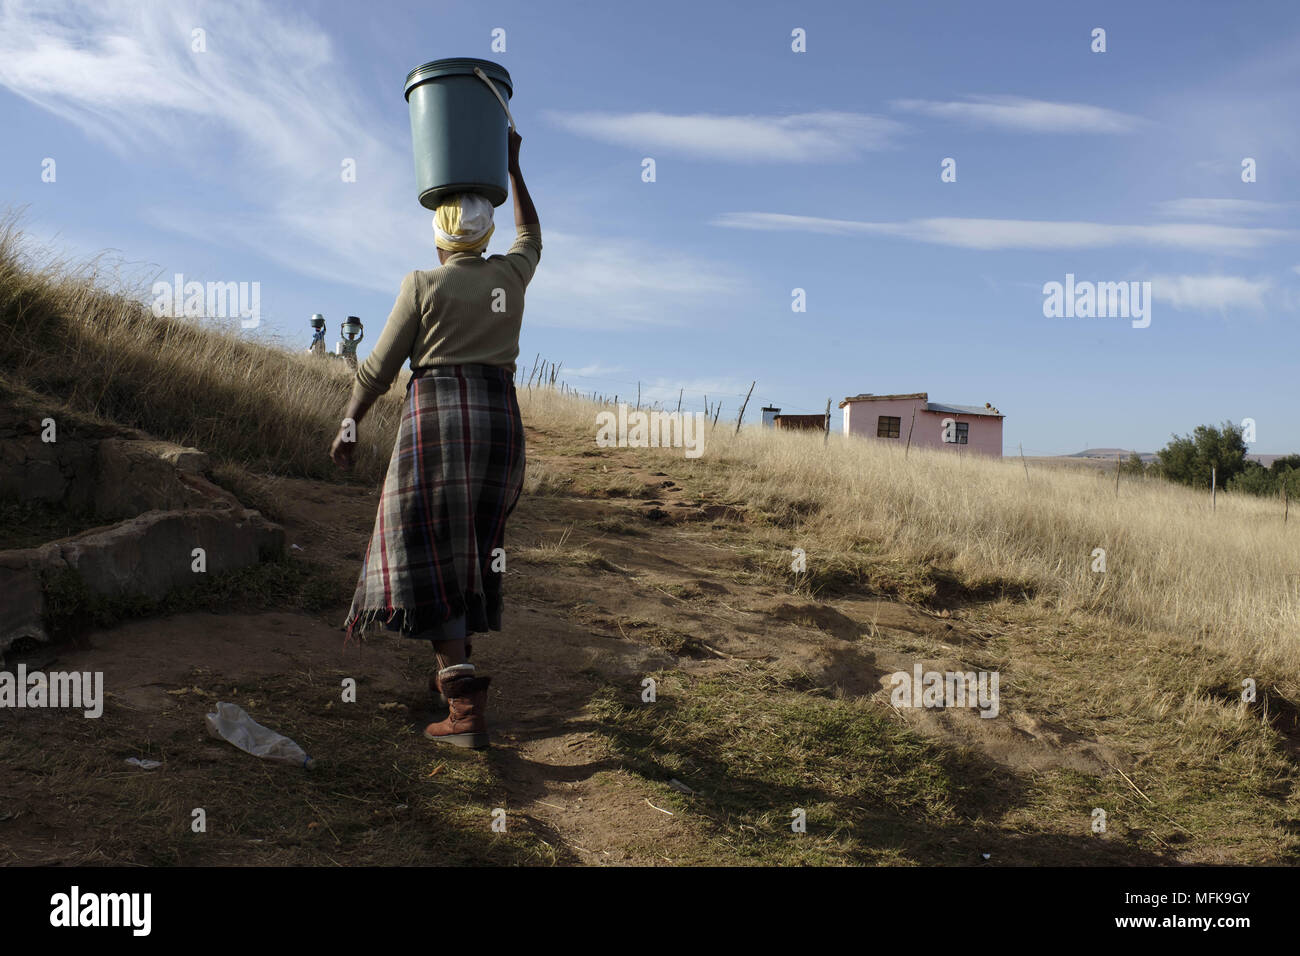 June 9, 2016 - Matatiele, Eastern Cape, South Africa - For a majority of people at the Eastern Cape it is a daily routine to carry buckets of spring water from the water source to their household. Running water, sanitation, and electricity have not reached small, and remote rural villages. (Credit Image: © Stefan Kleinowitz via ZUMA Wire) Stock Photo